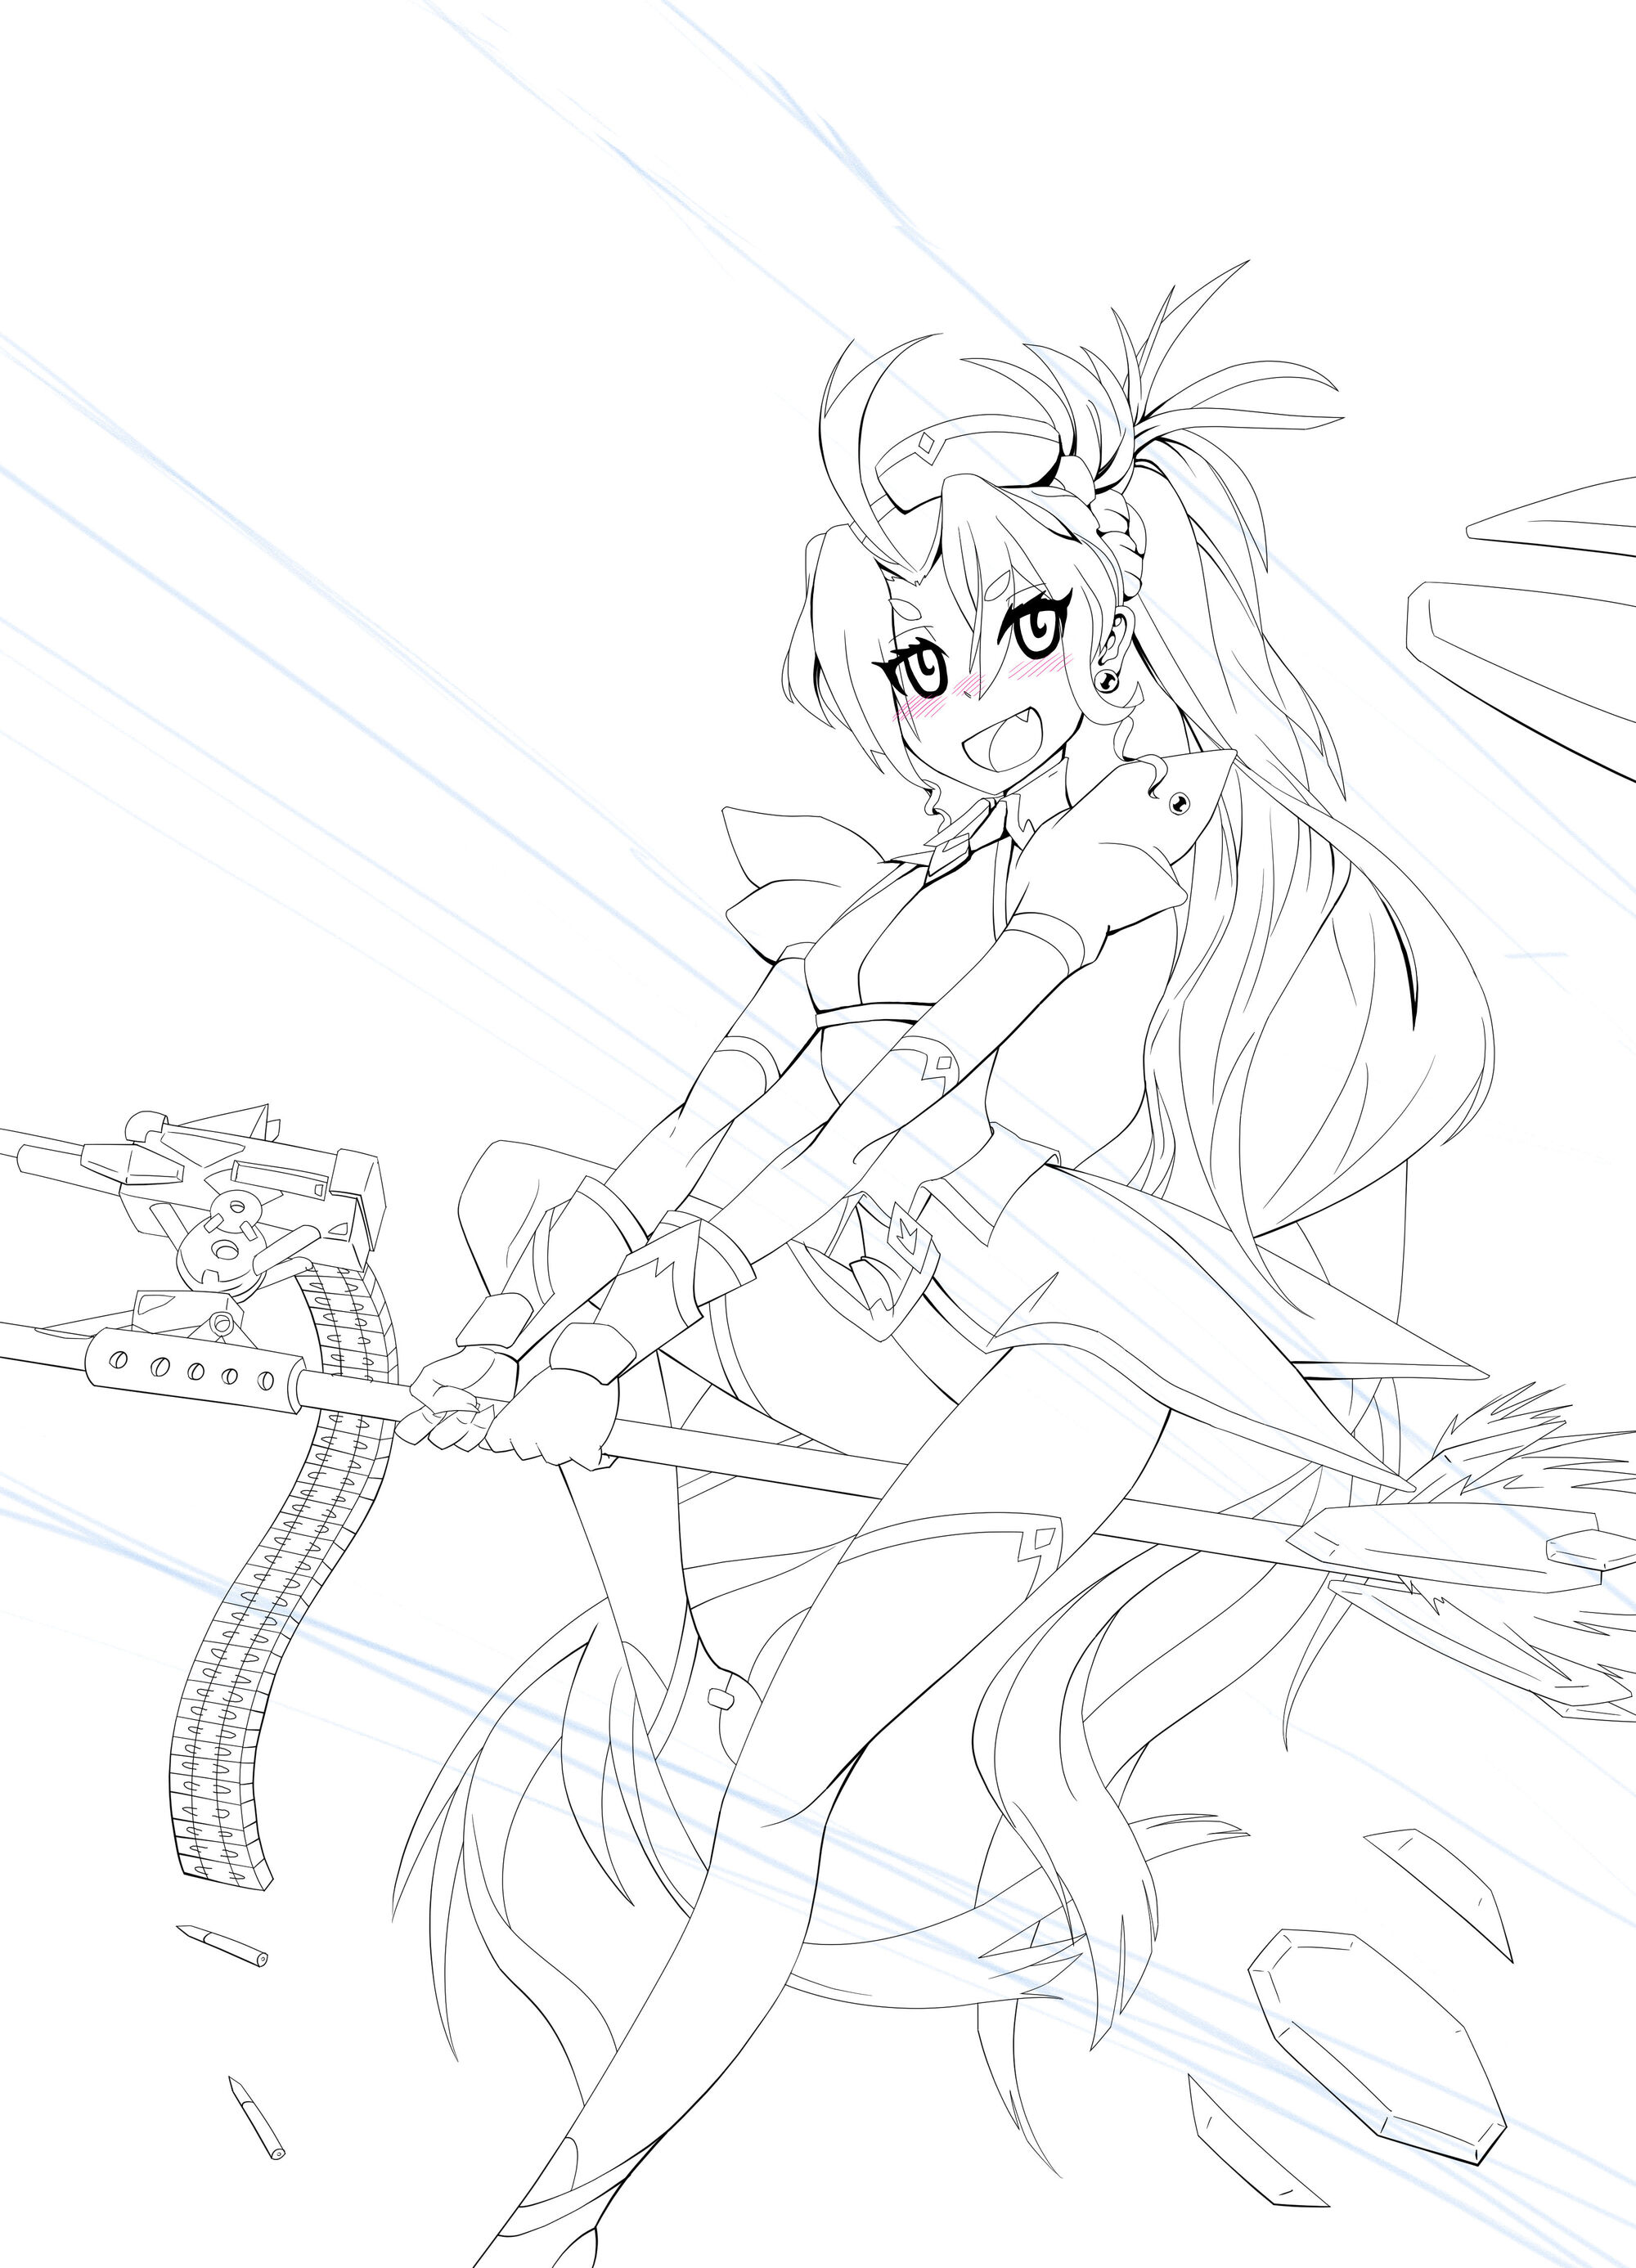 magical girl lineart example